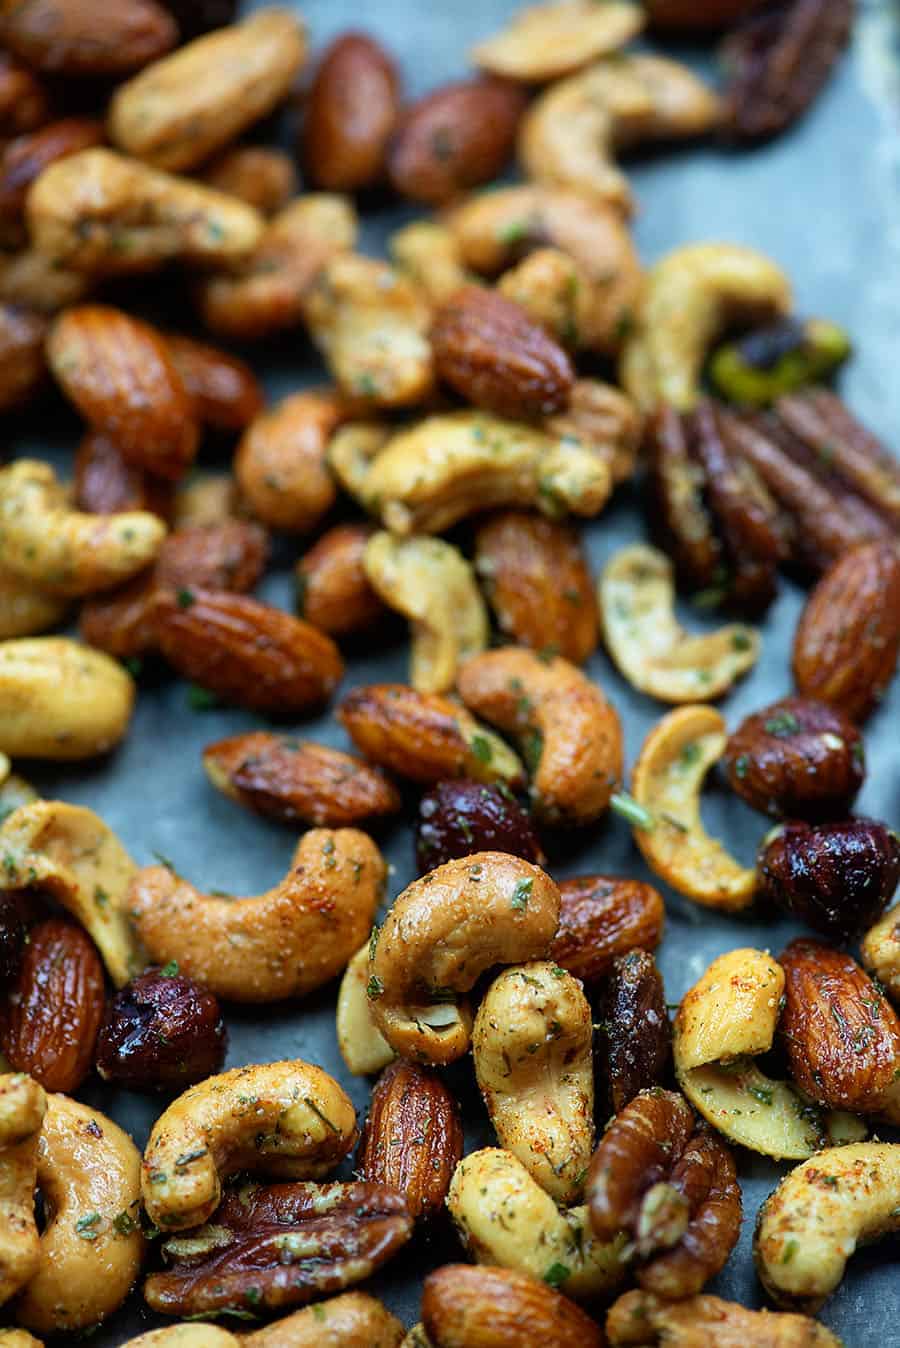 Various roasted nuts on a baking sheet.